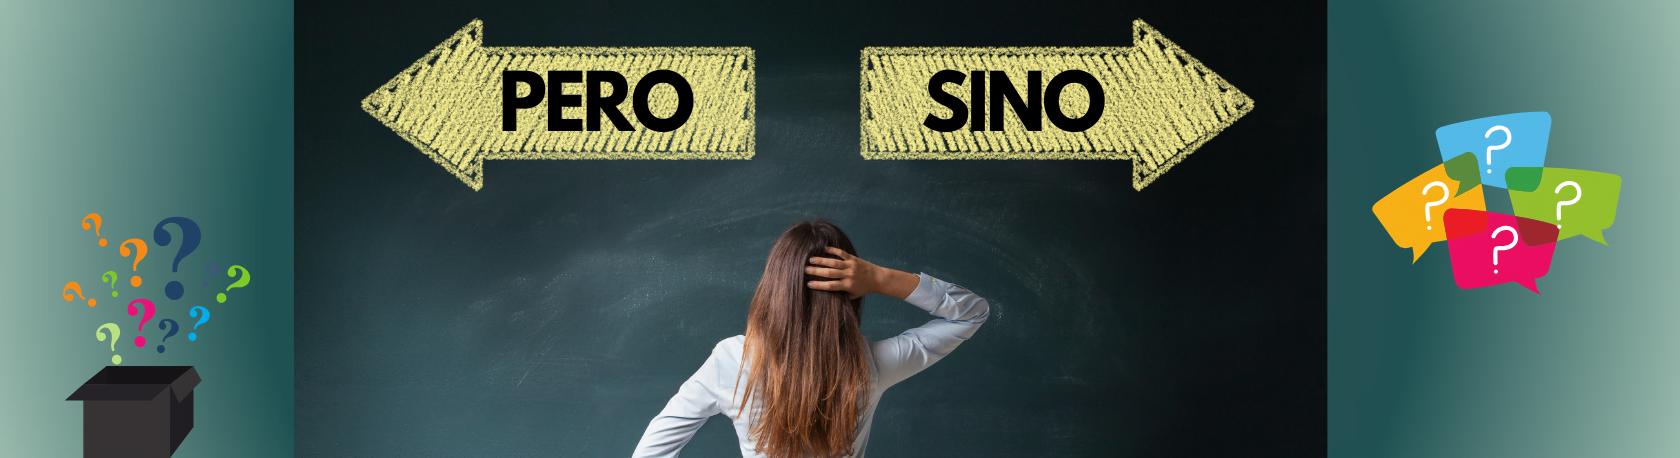 Develop your Spanish grammar skills and review the differences between PERO & SINO